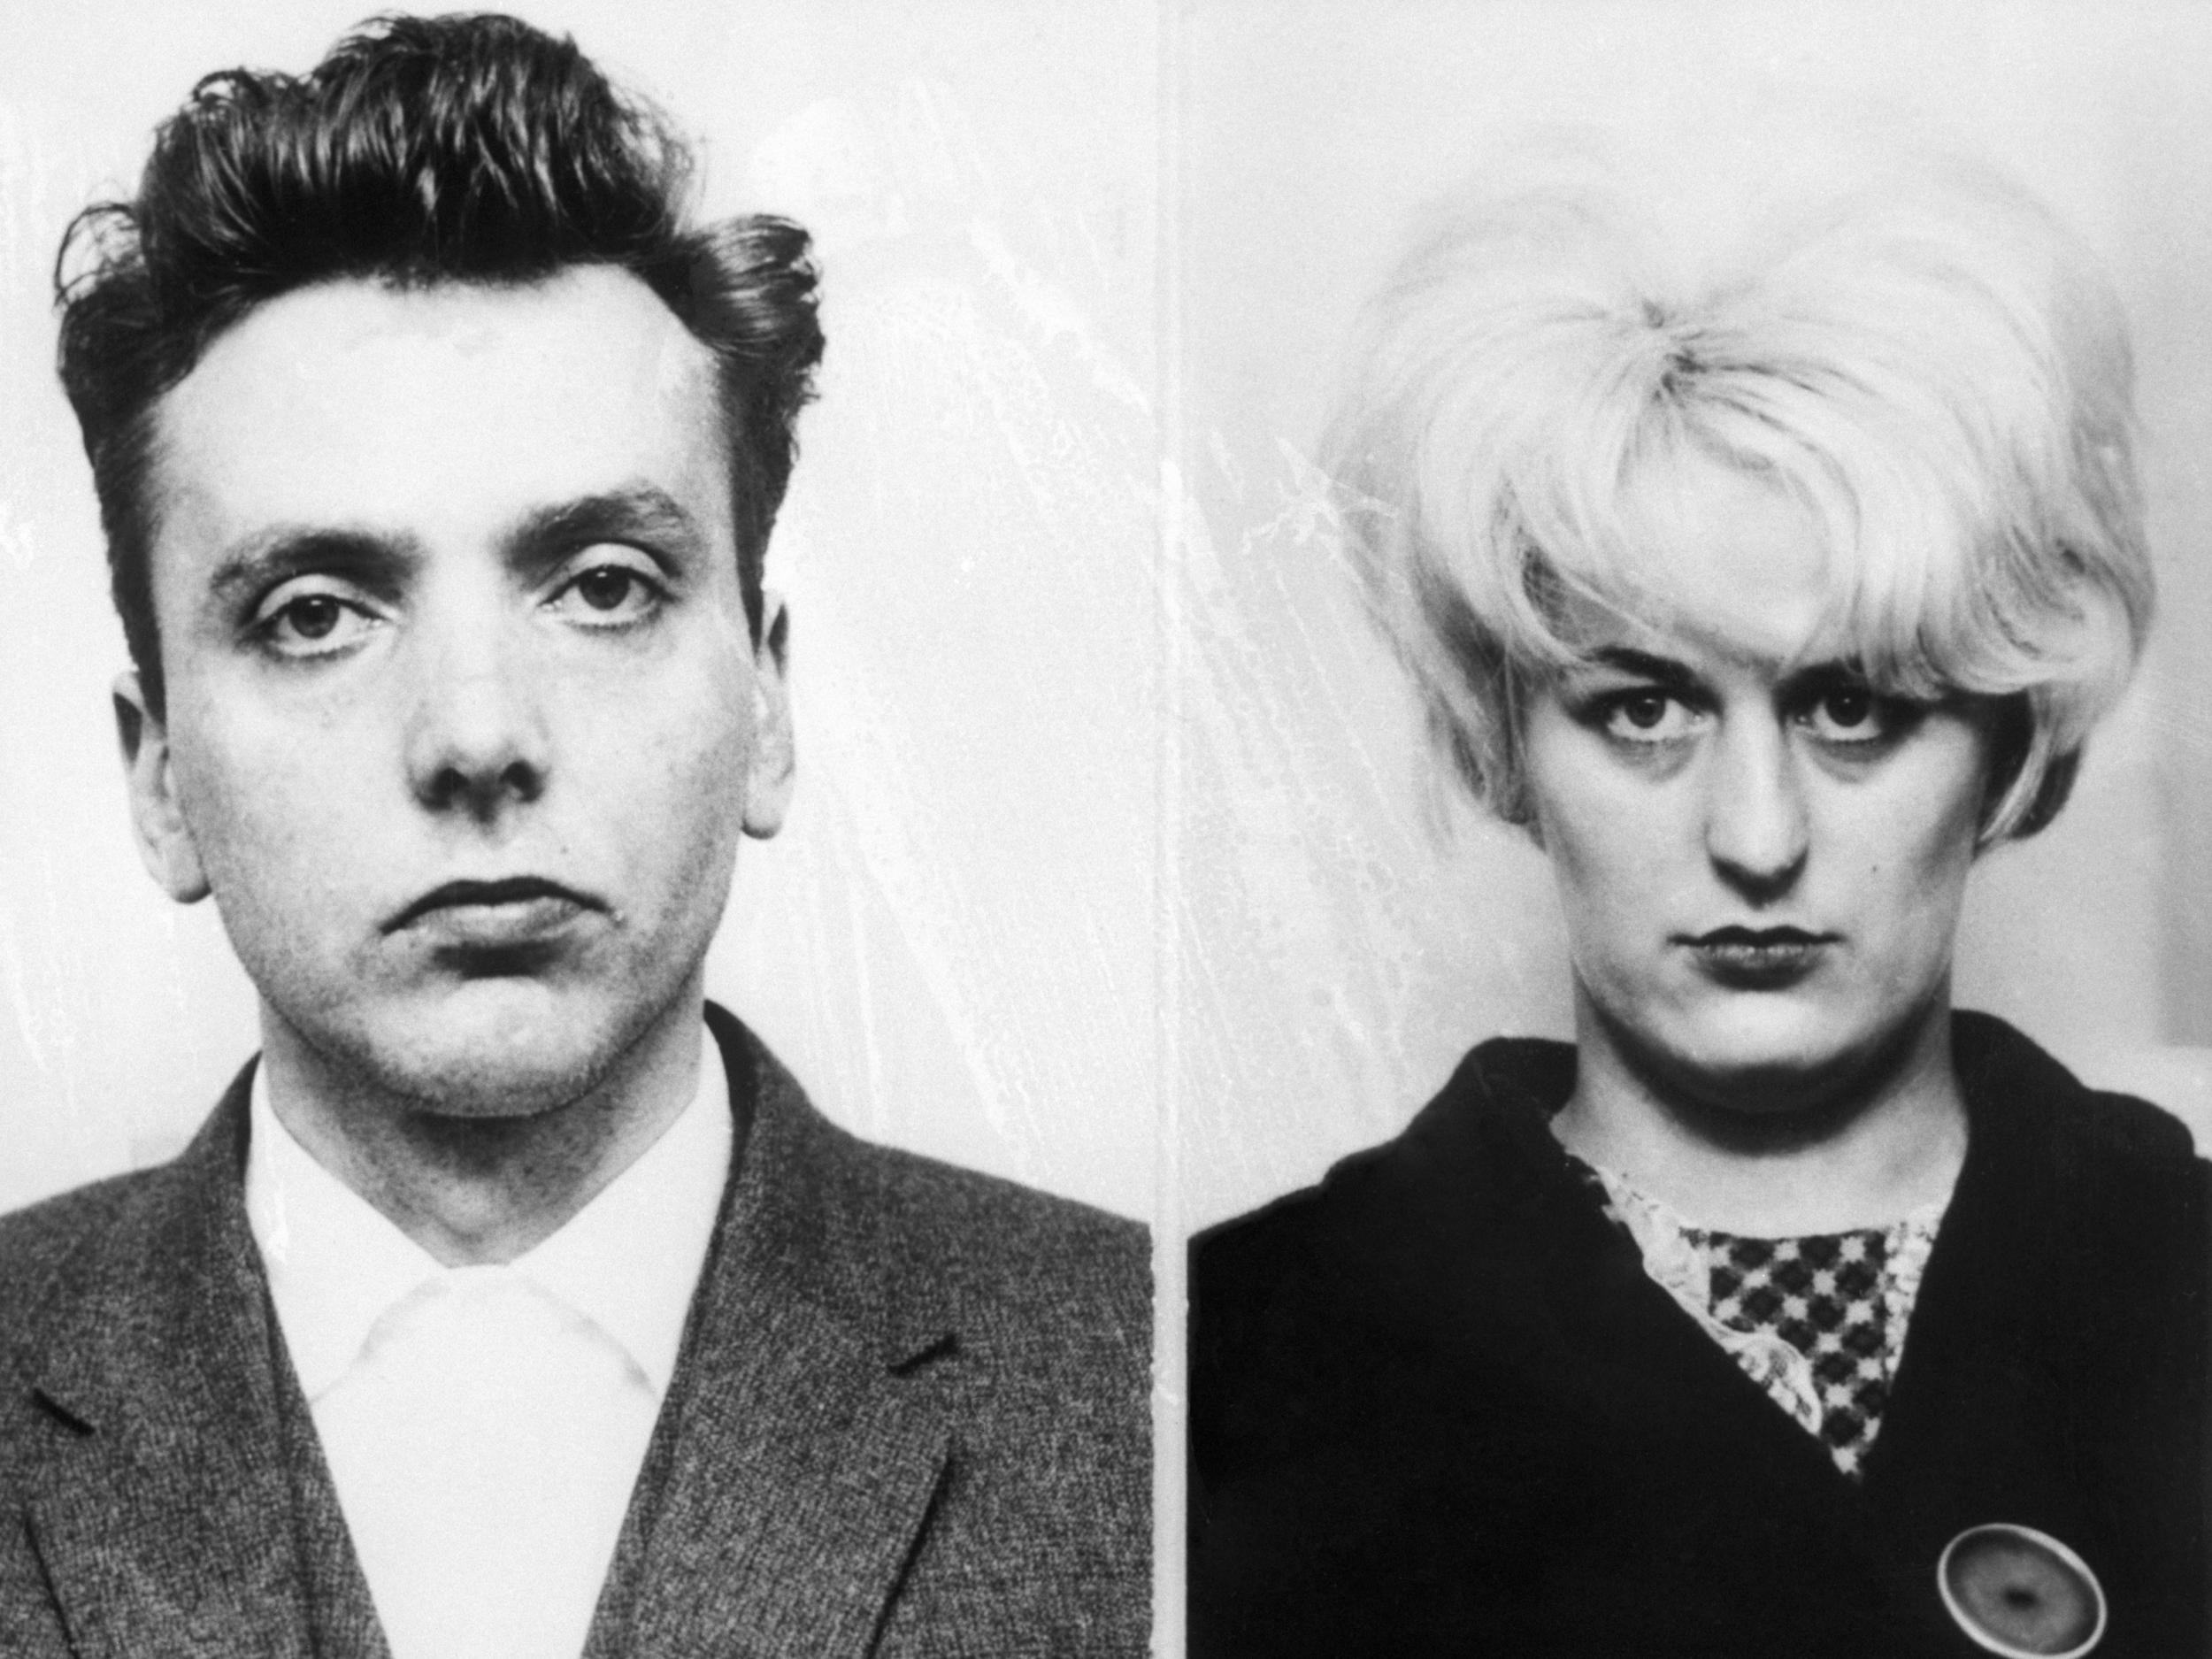 The best-known female serial killers of the 20th century have been those who, like Myra Hindley, were part of a criminal relationship with a willing partner, like Ian Brady